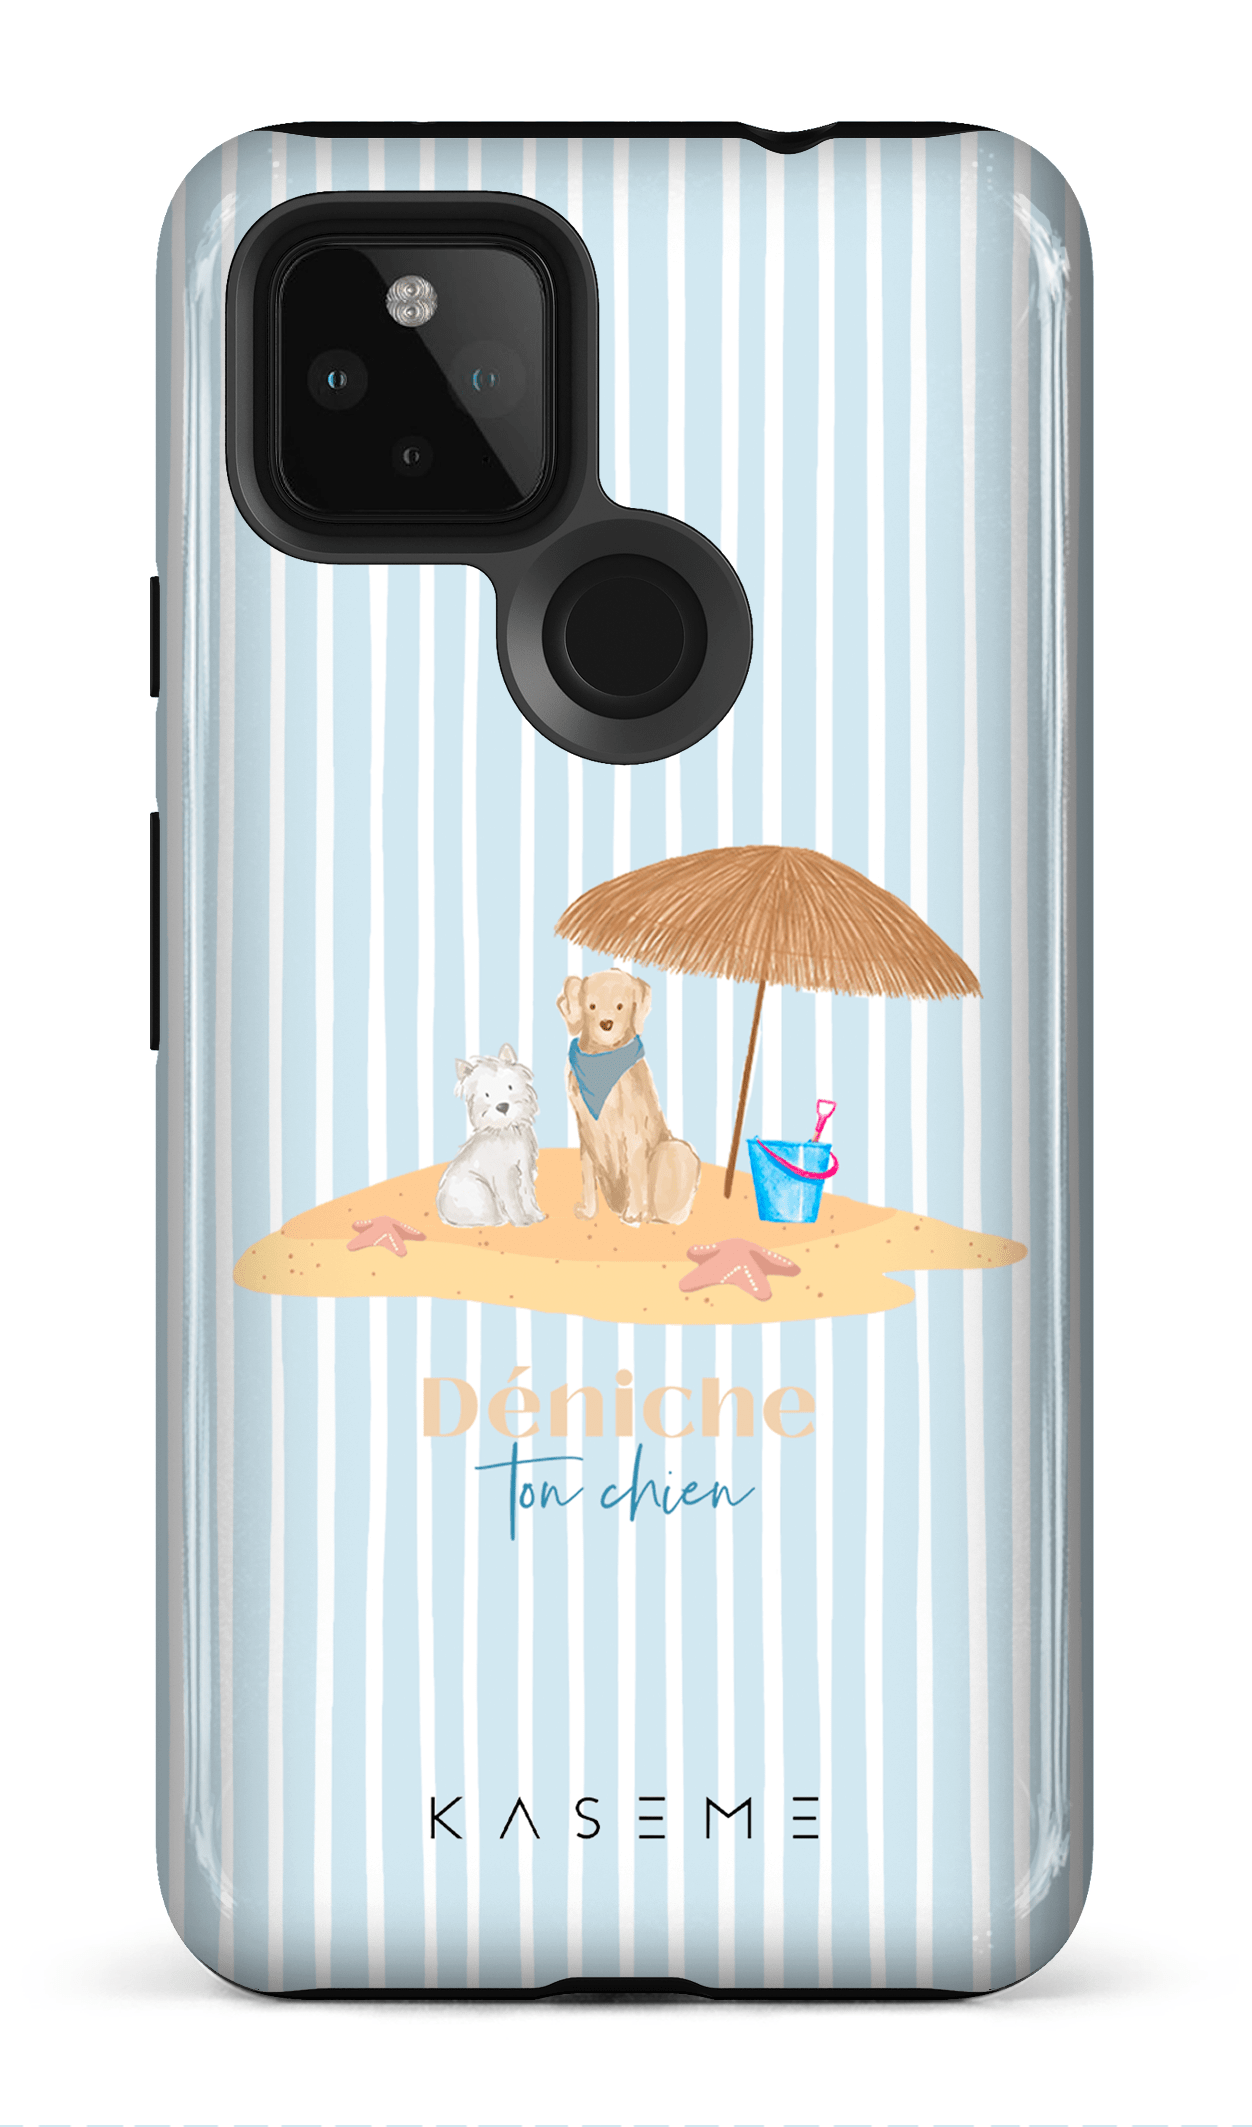 Dogs On Vacay Mode by Déniche Ton Chien - Google Pixel 4A (5G)